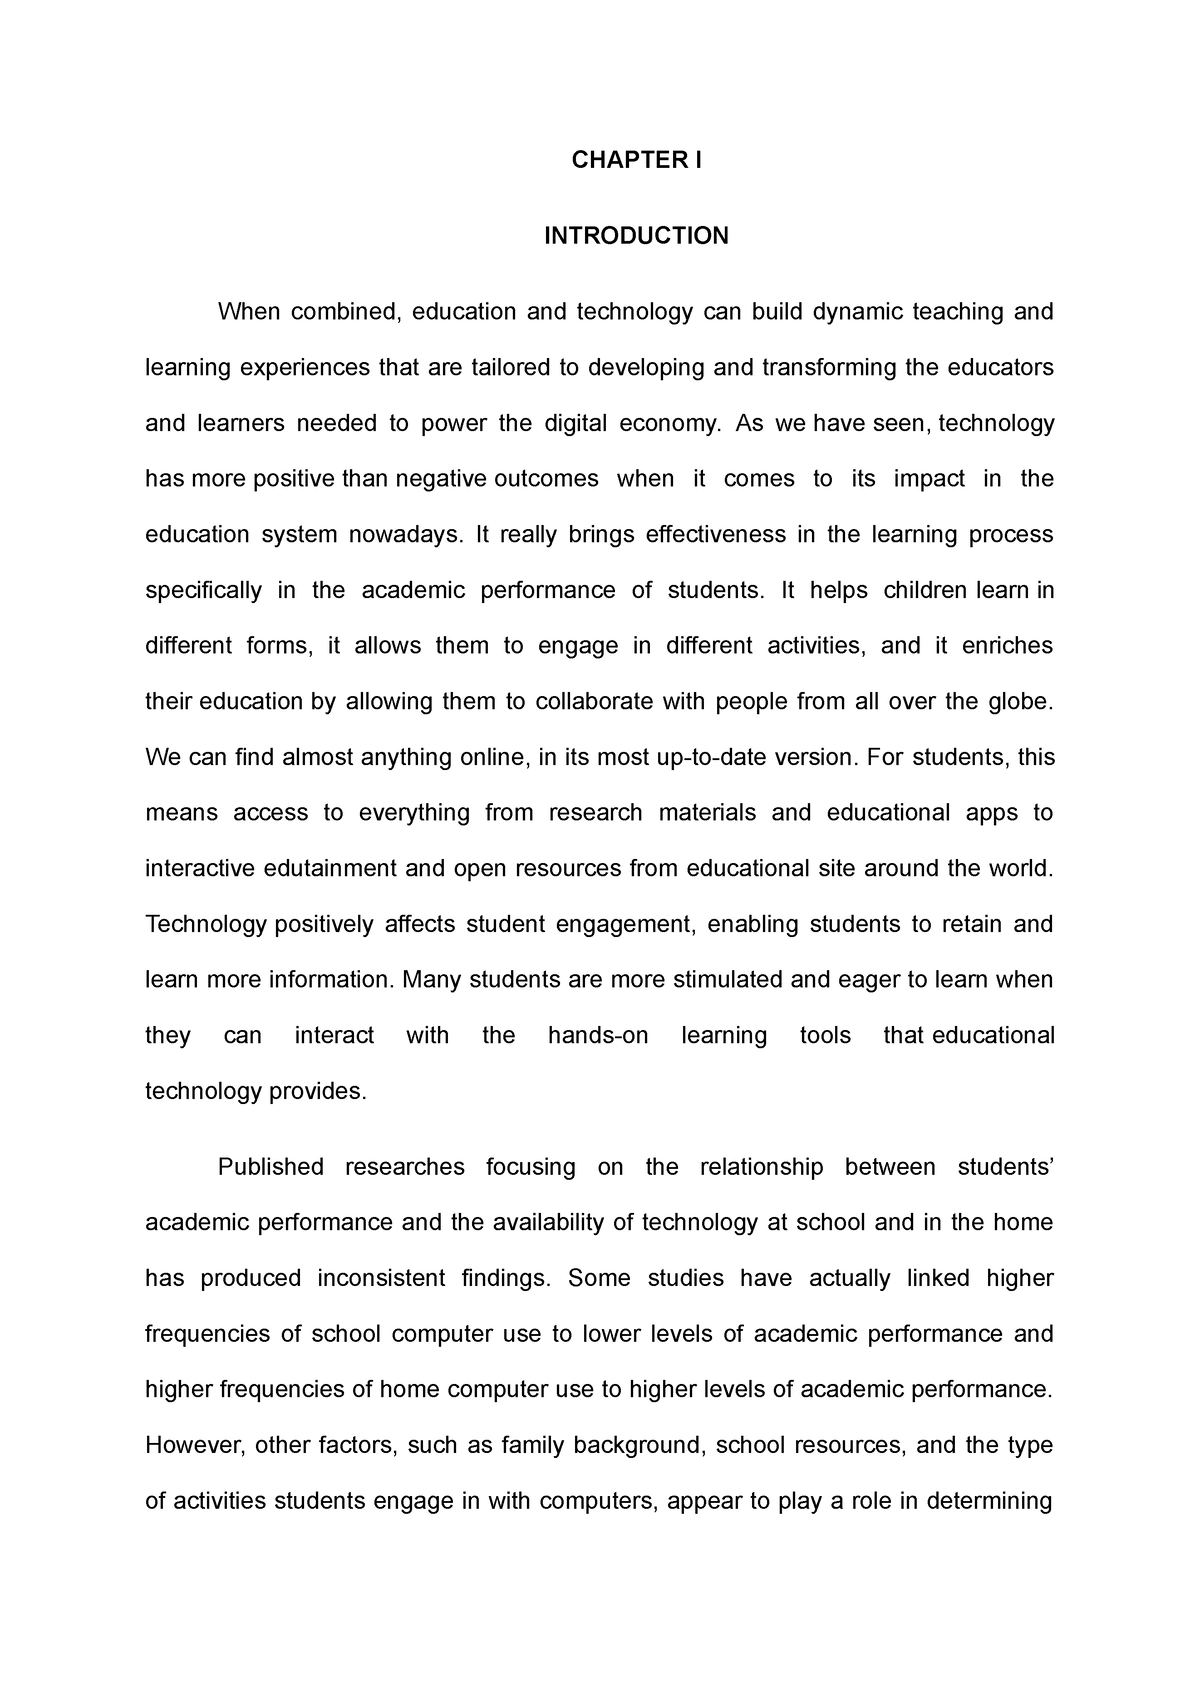 essay for practical research